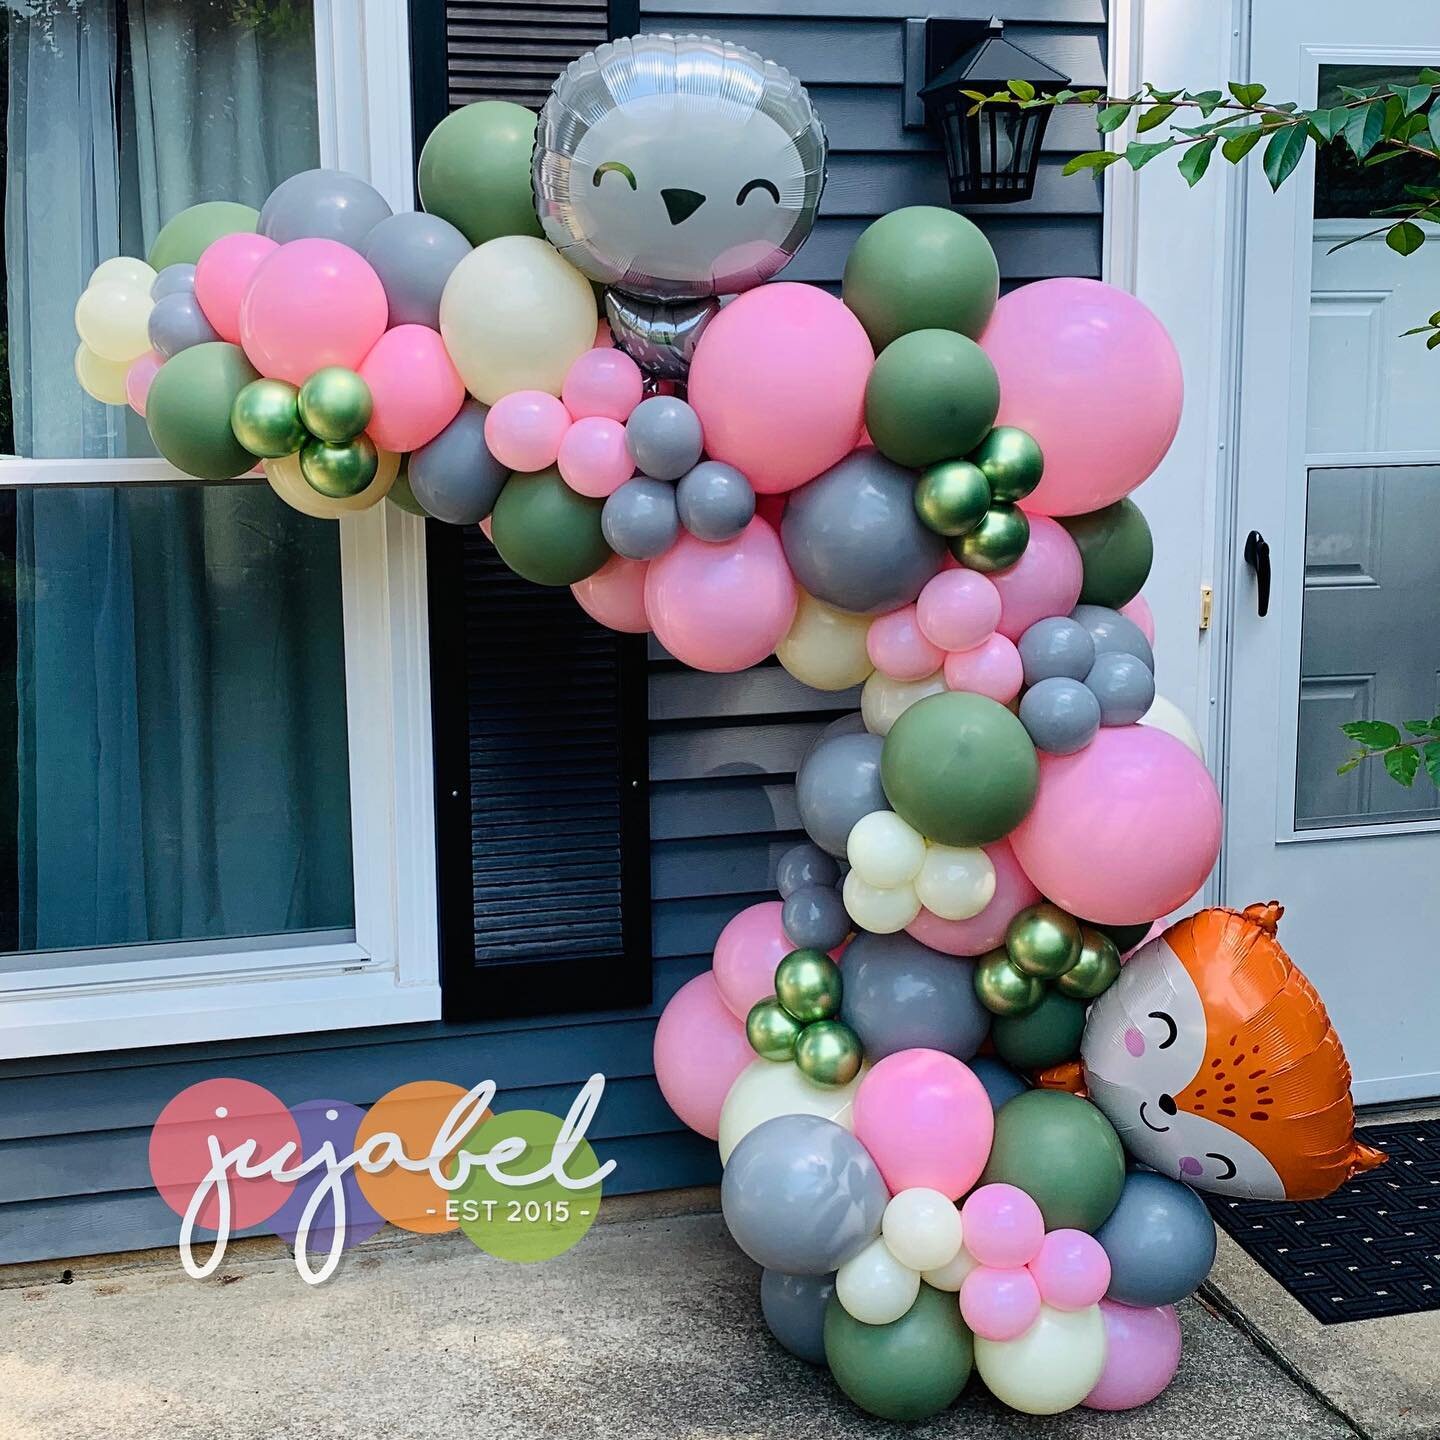 Due to Covid many people are celebrating life&rsquo;s most treasured moments in very creative ways. This Organic Demi Arch was sent to friend for her virtual baby shower ❤️ this way everyone can attend and celebrate without exposing mom to be 🥰

#ba